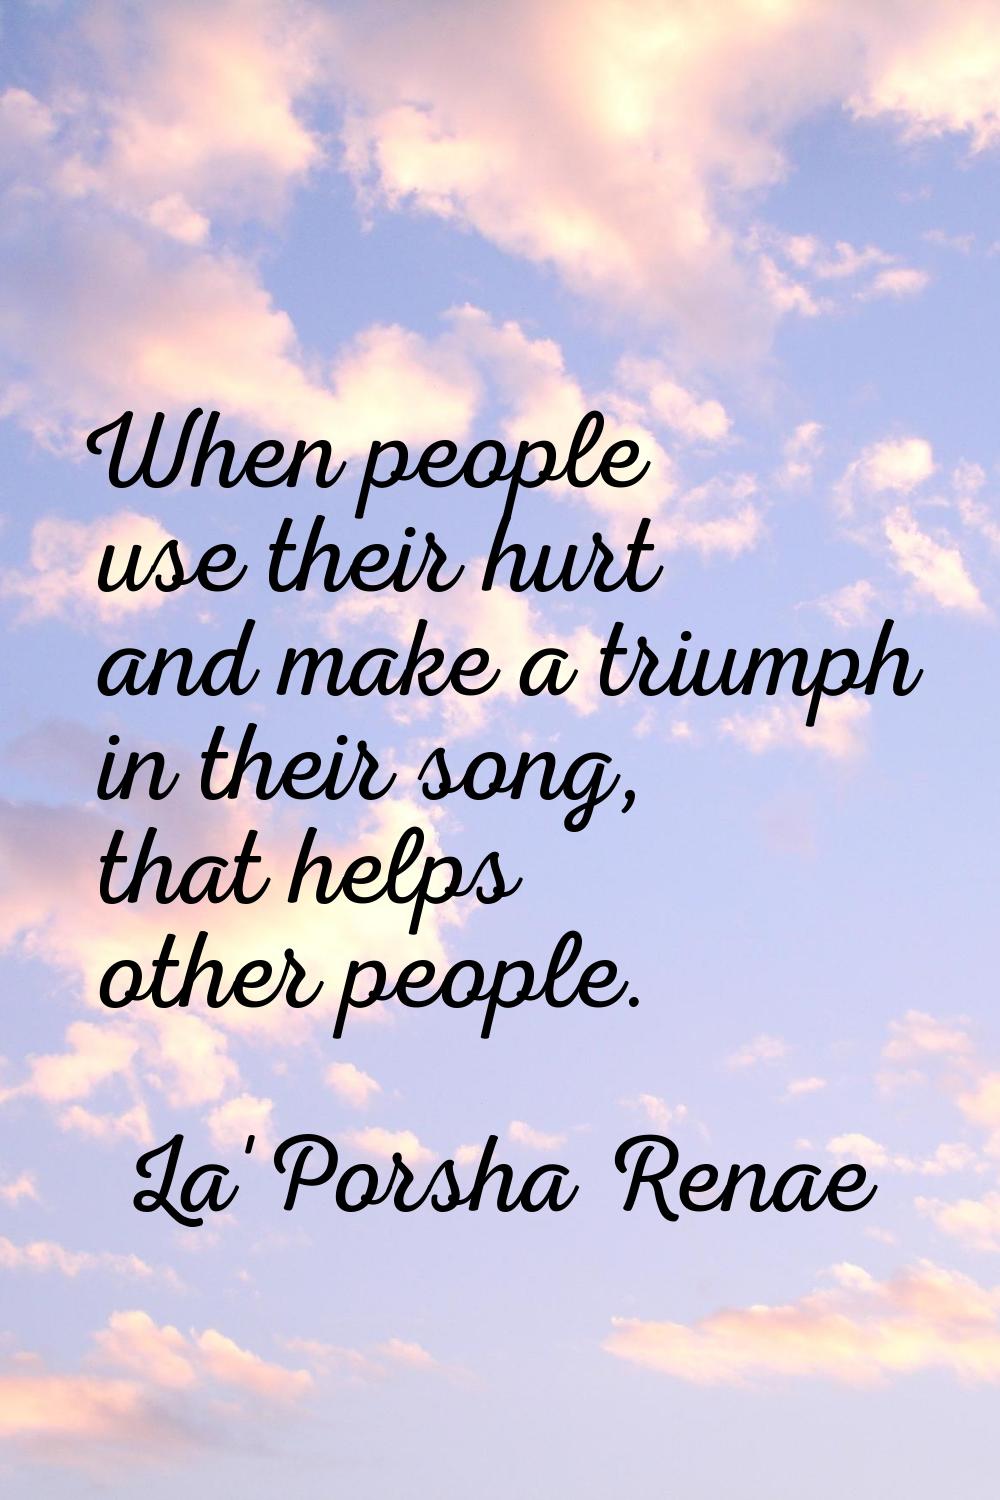 When people use their hurt and make a triumph in their song, that helps other people.